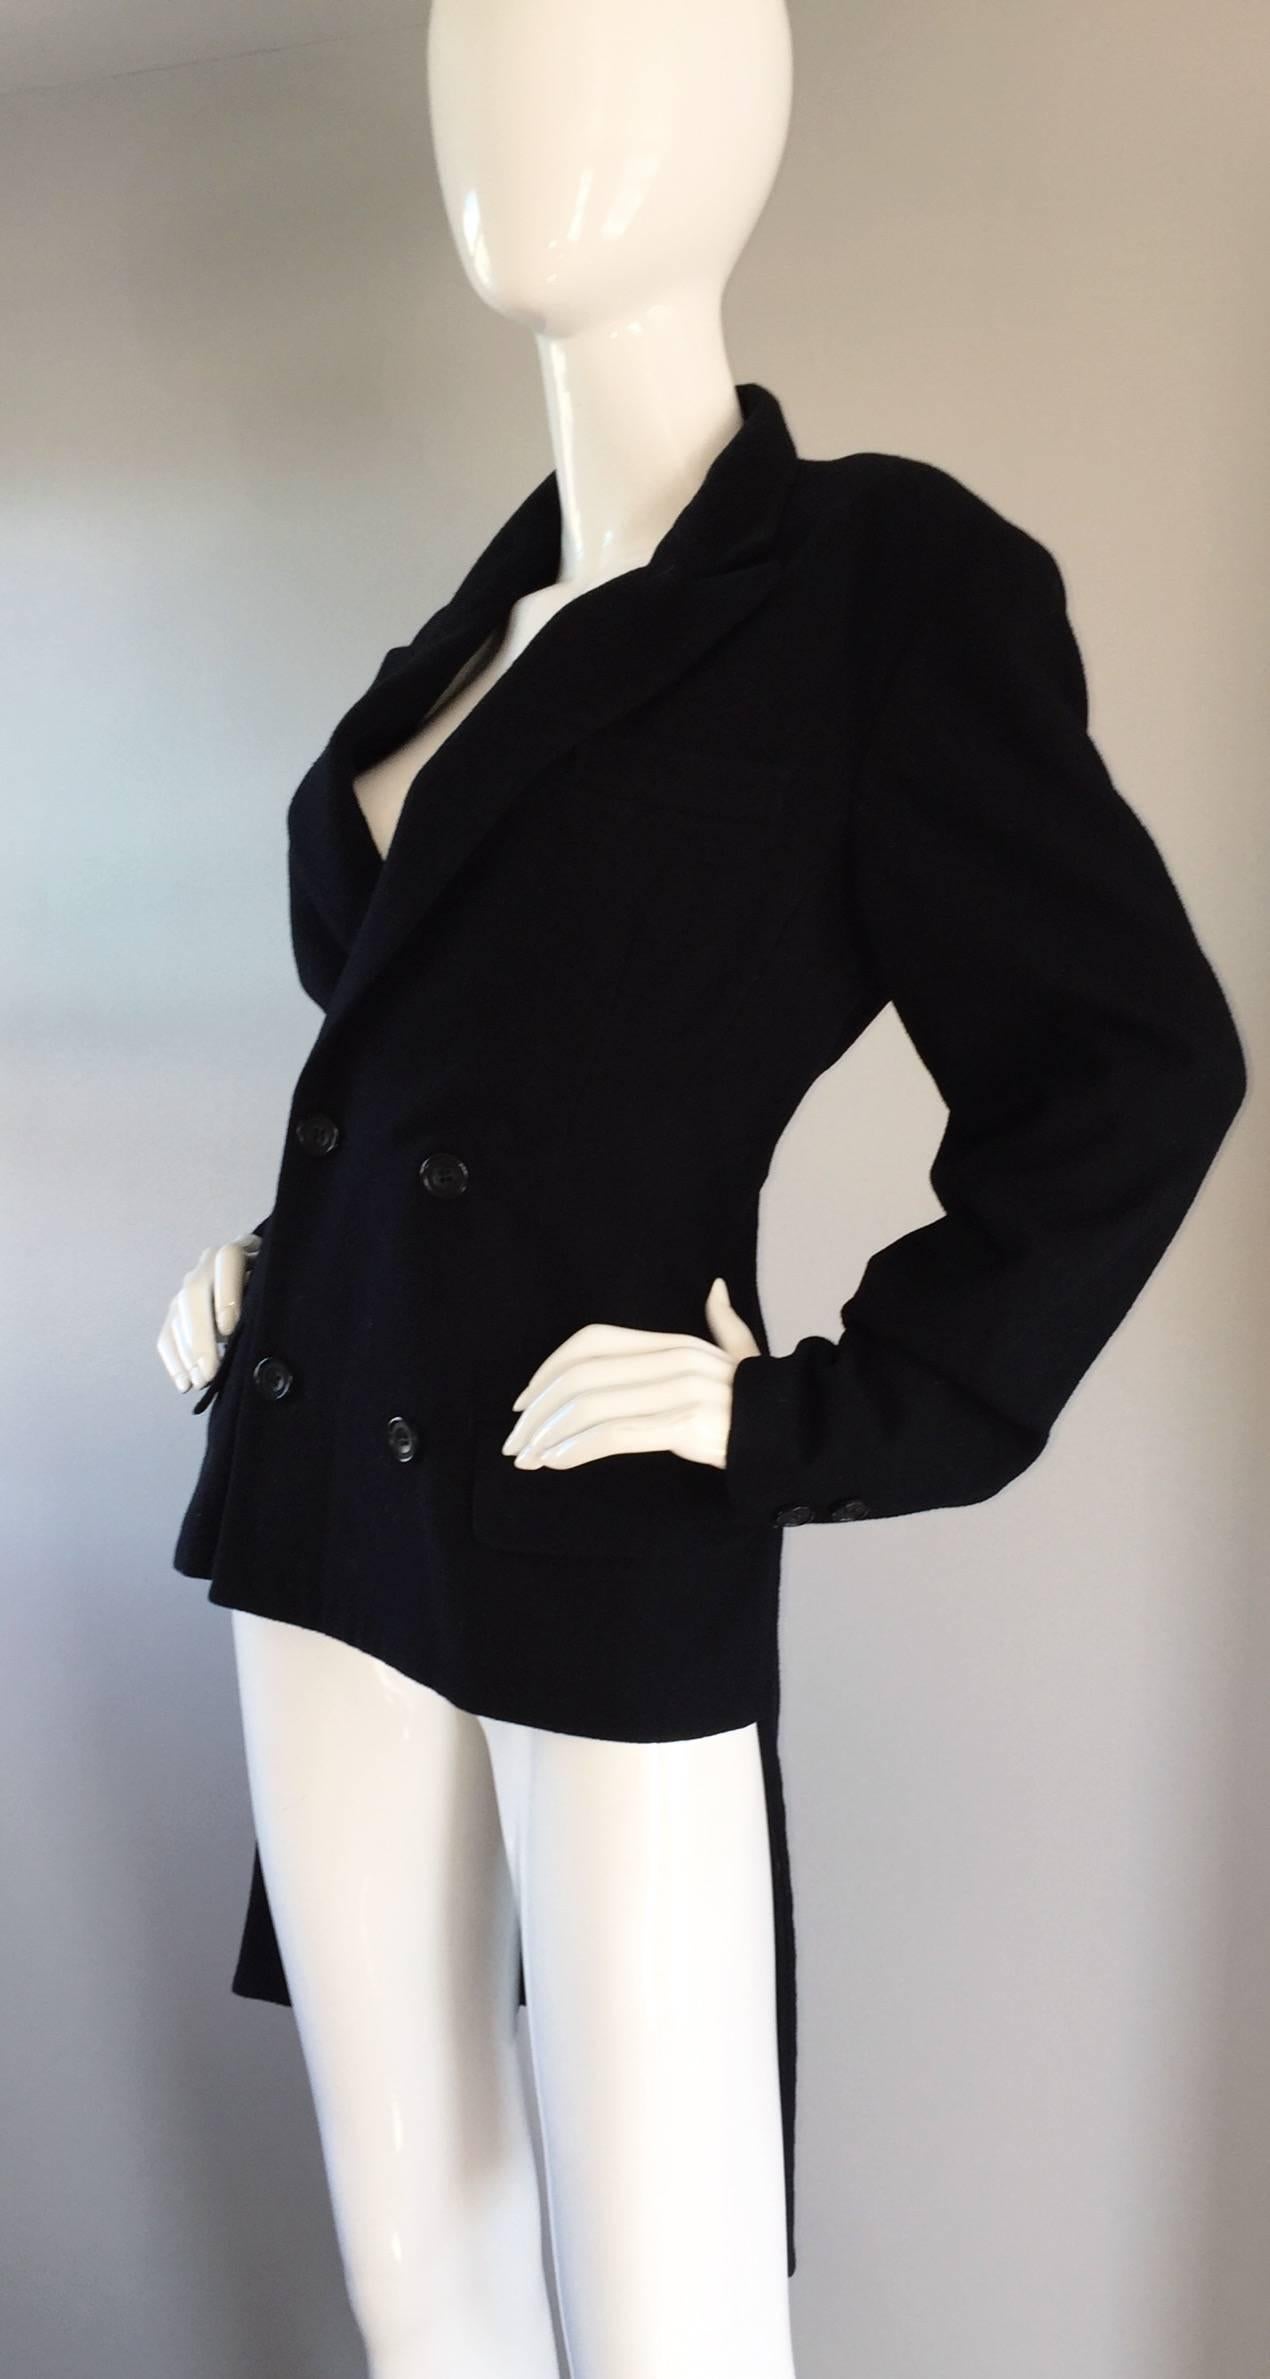 Super rare, and quite impressive early Yohji Yamamoto black wool blazer! Features a 'carwash' hem on the back. Double breasted style, that takes a step above the rest! Absolute impeccable construction, by an award winning designer. Your perfect new